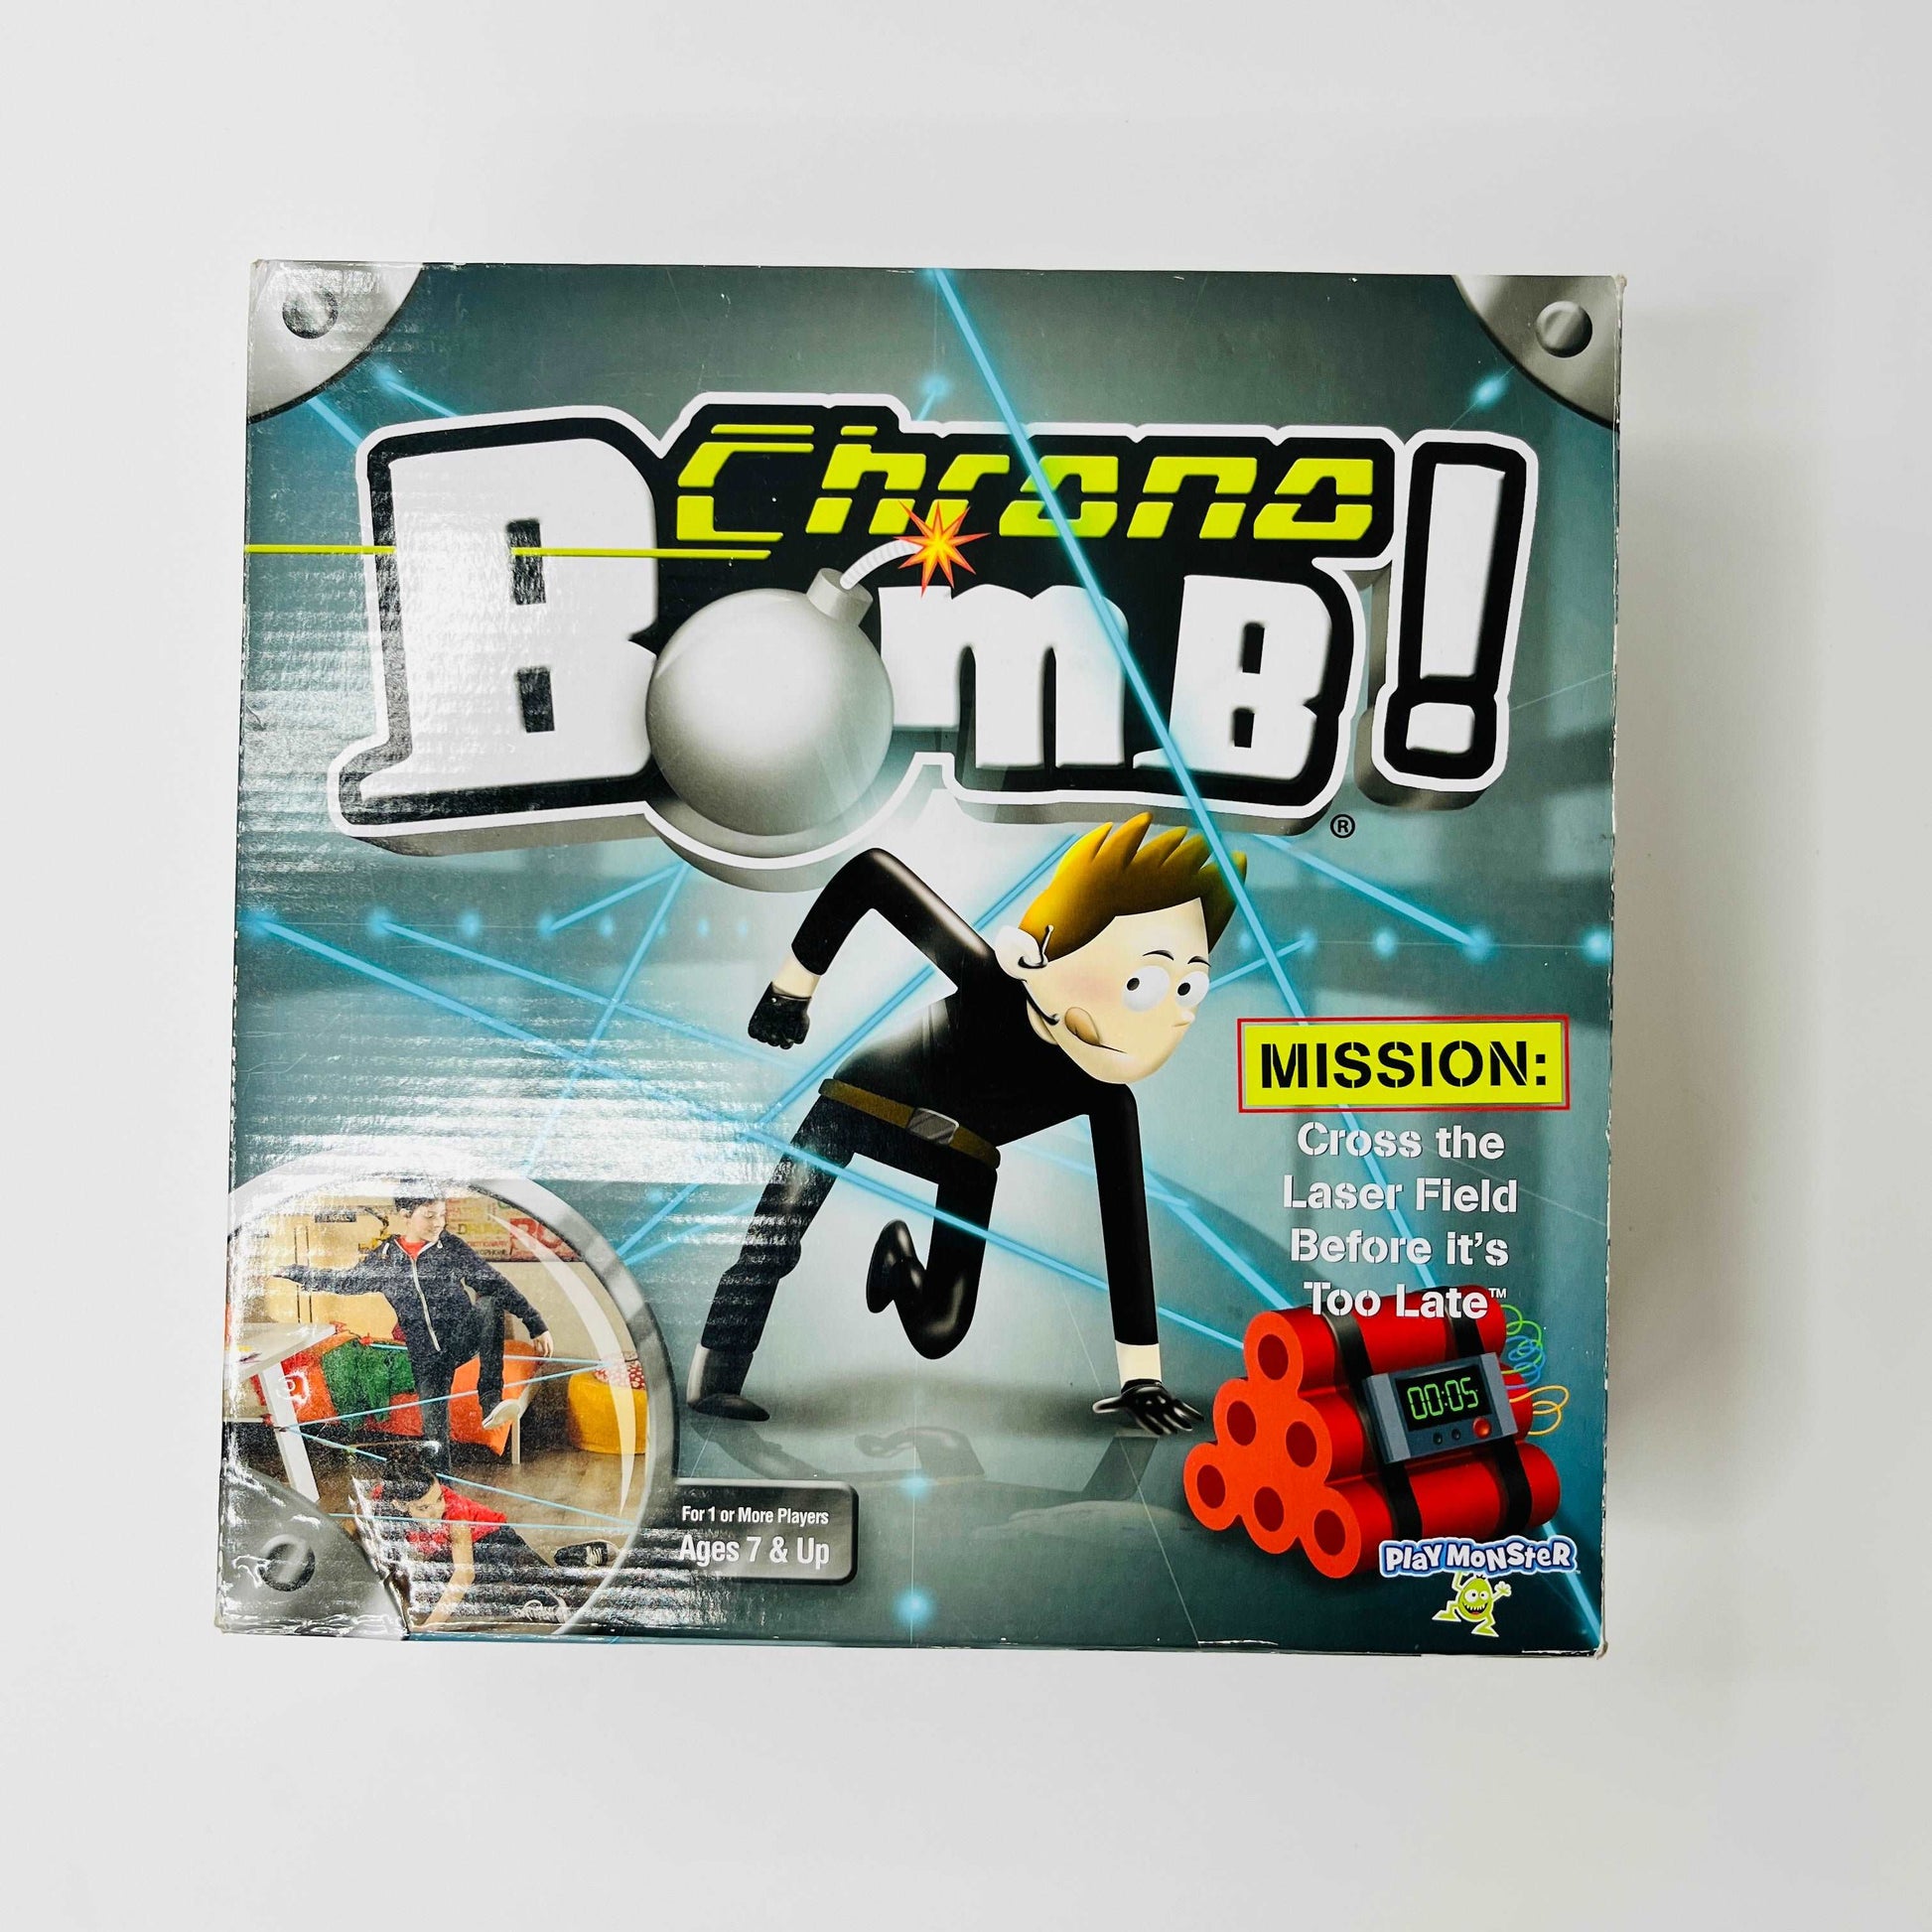 Kids Toys: Play Monster Chrono Bomb Action Game Toys [8 Years]